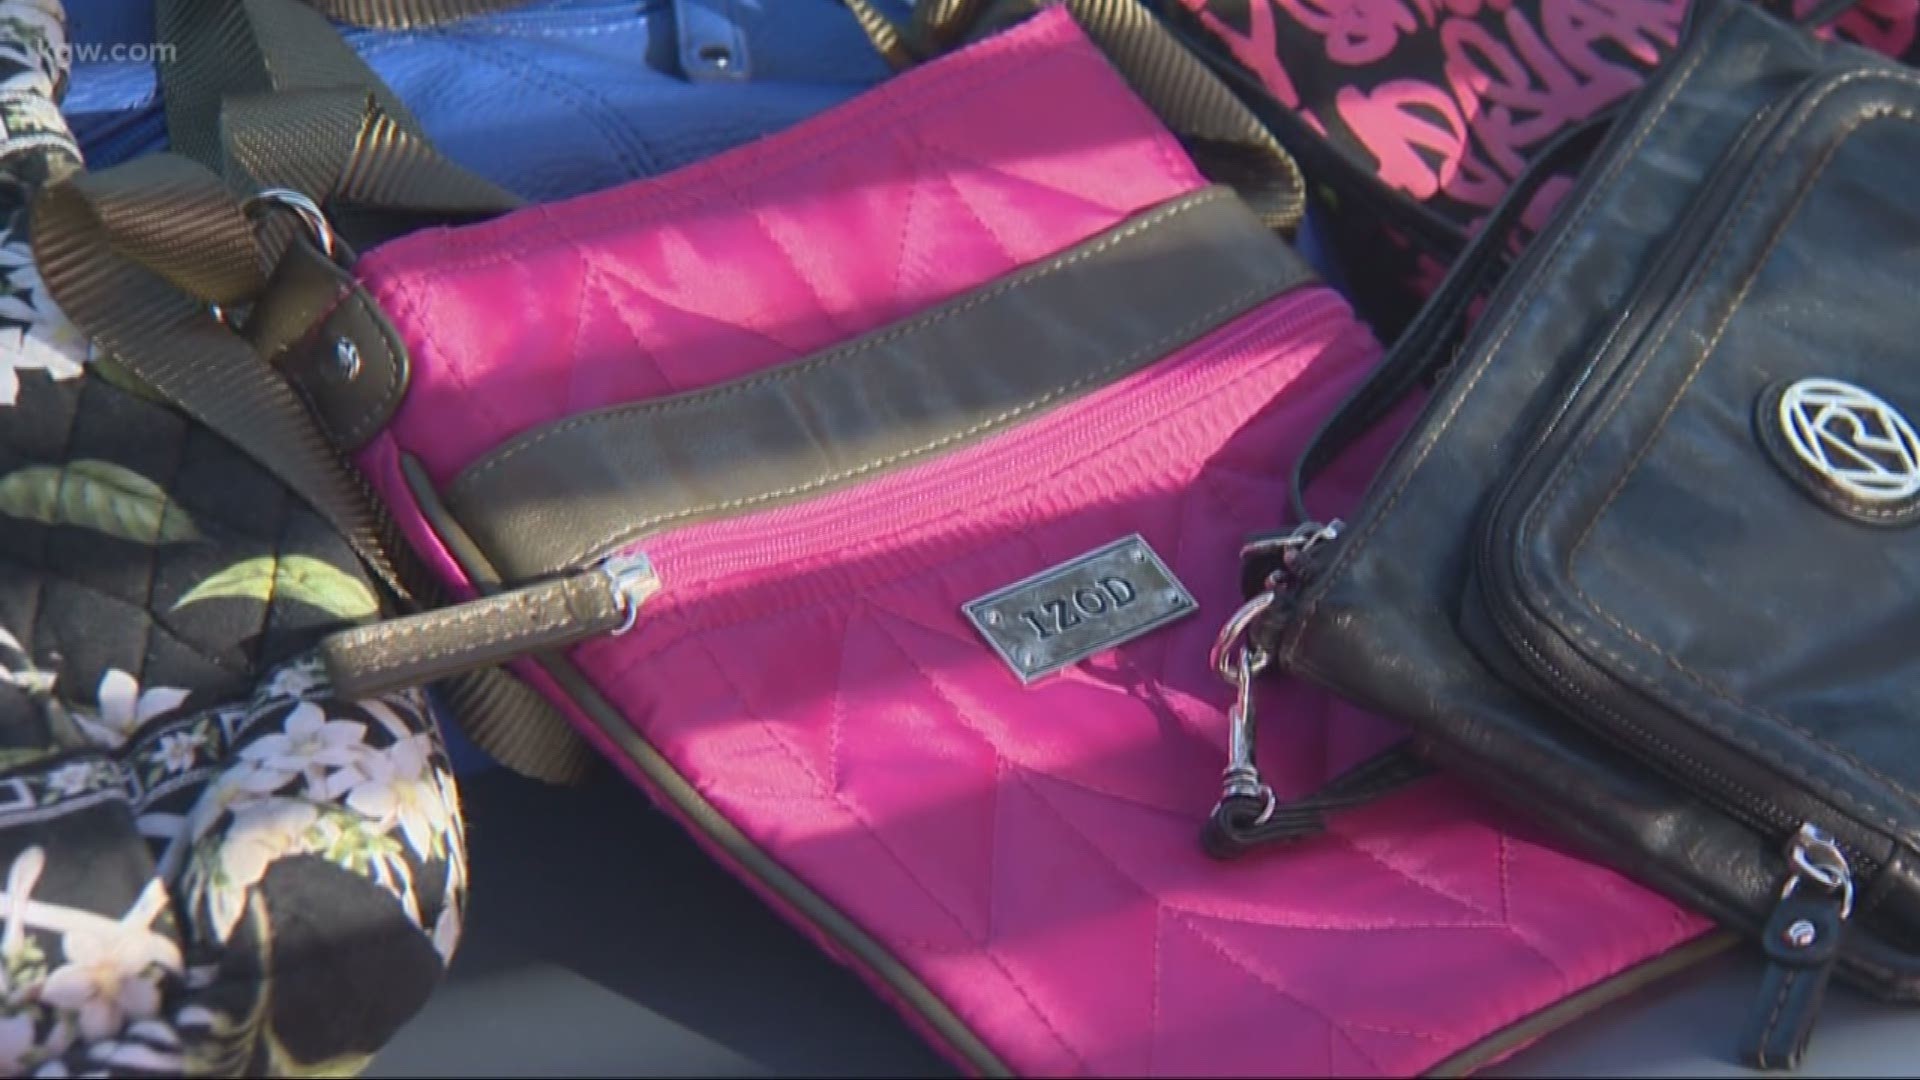 Polli Collins and Claire Thayer describe their effort to collect more than 100 purses